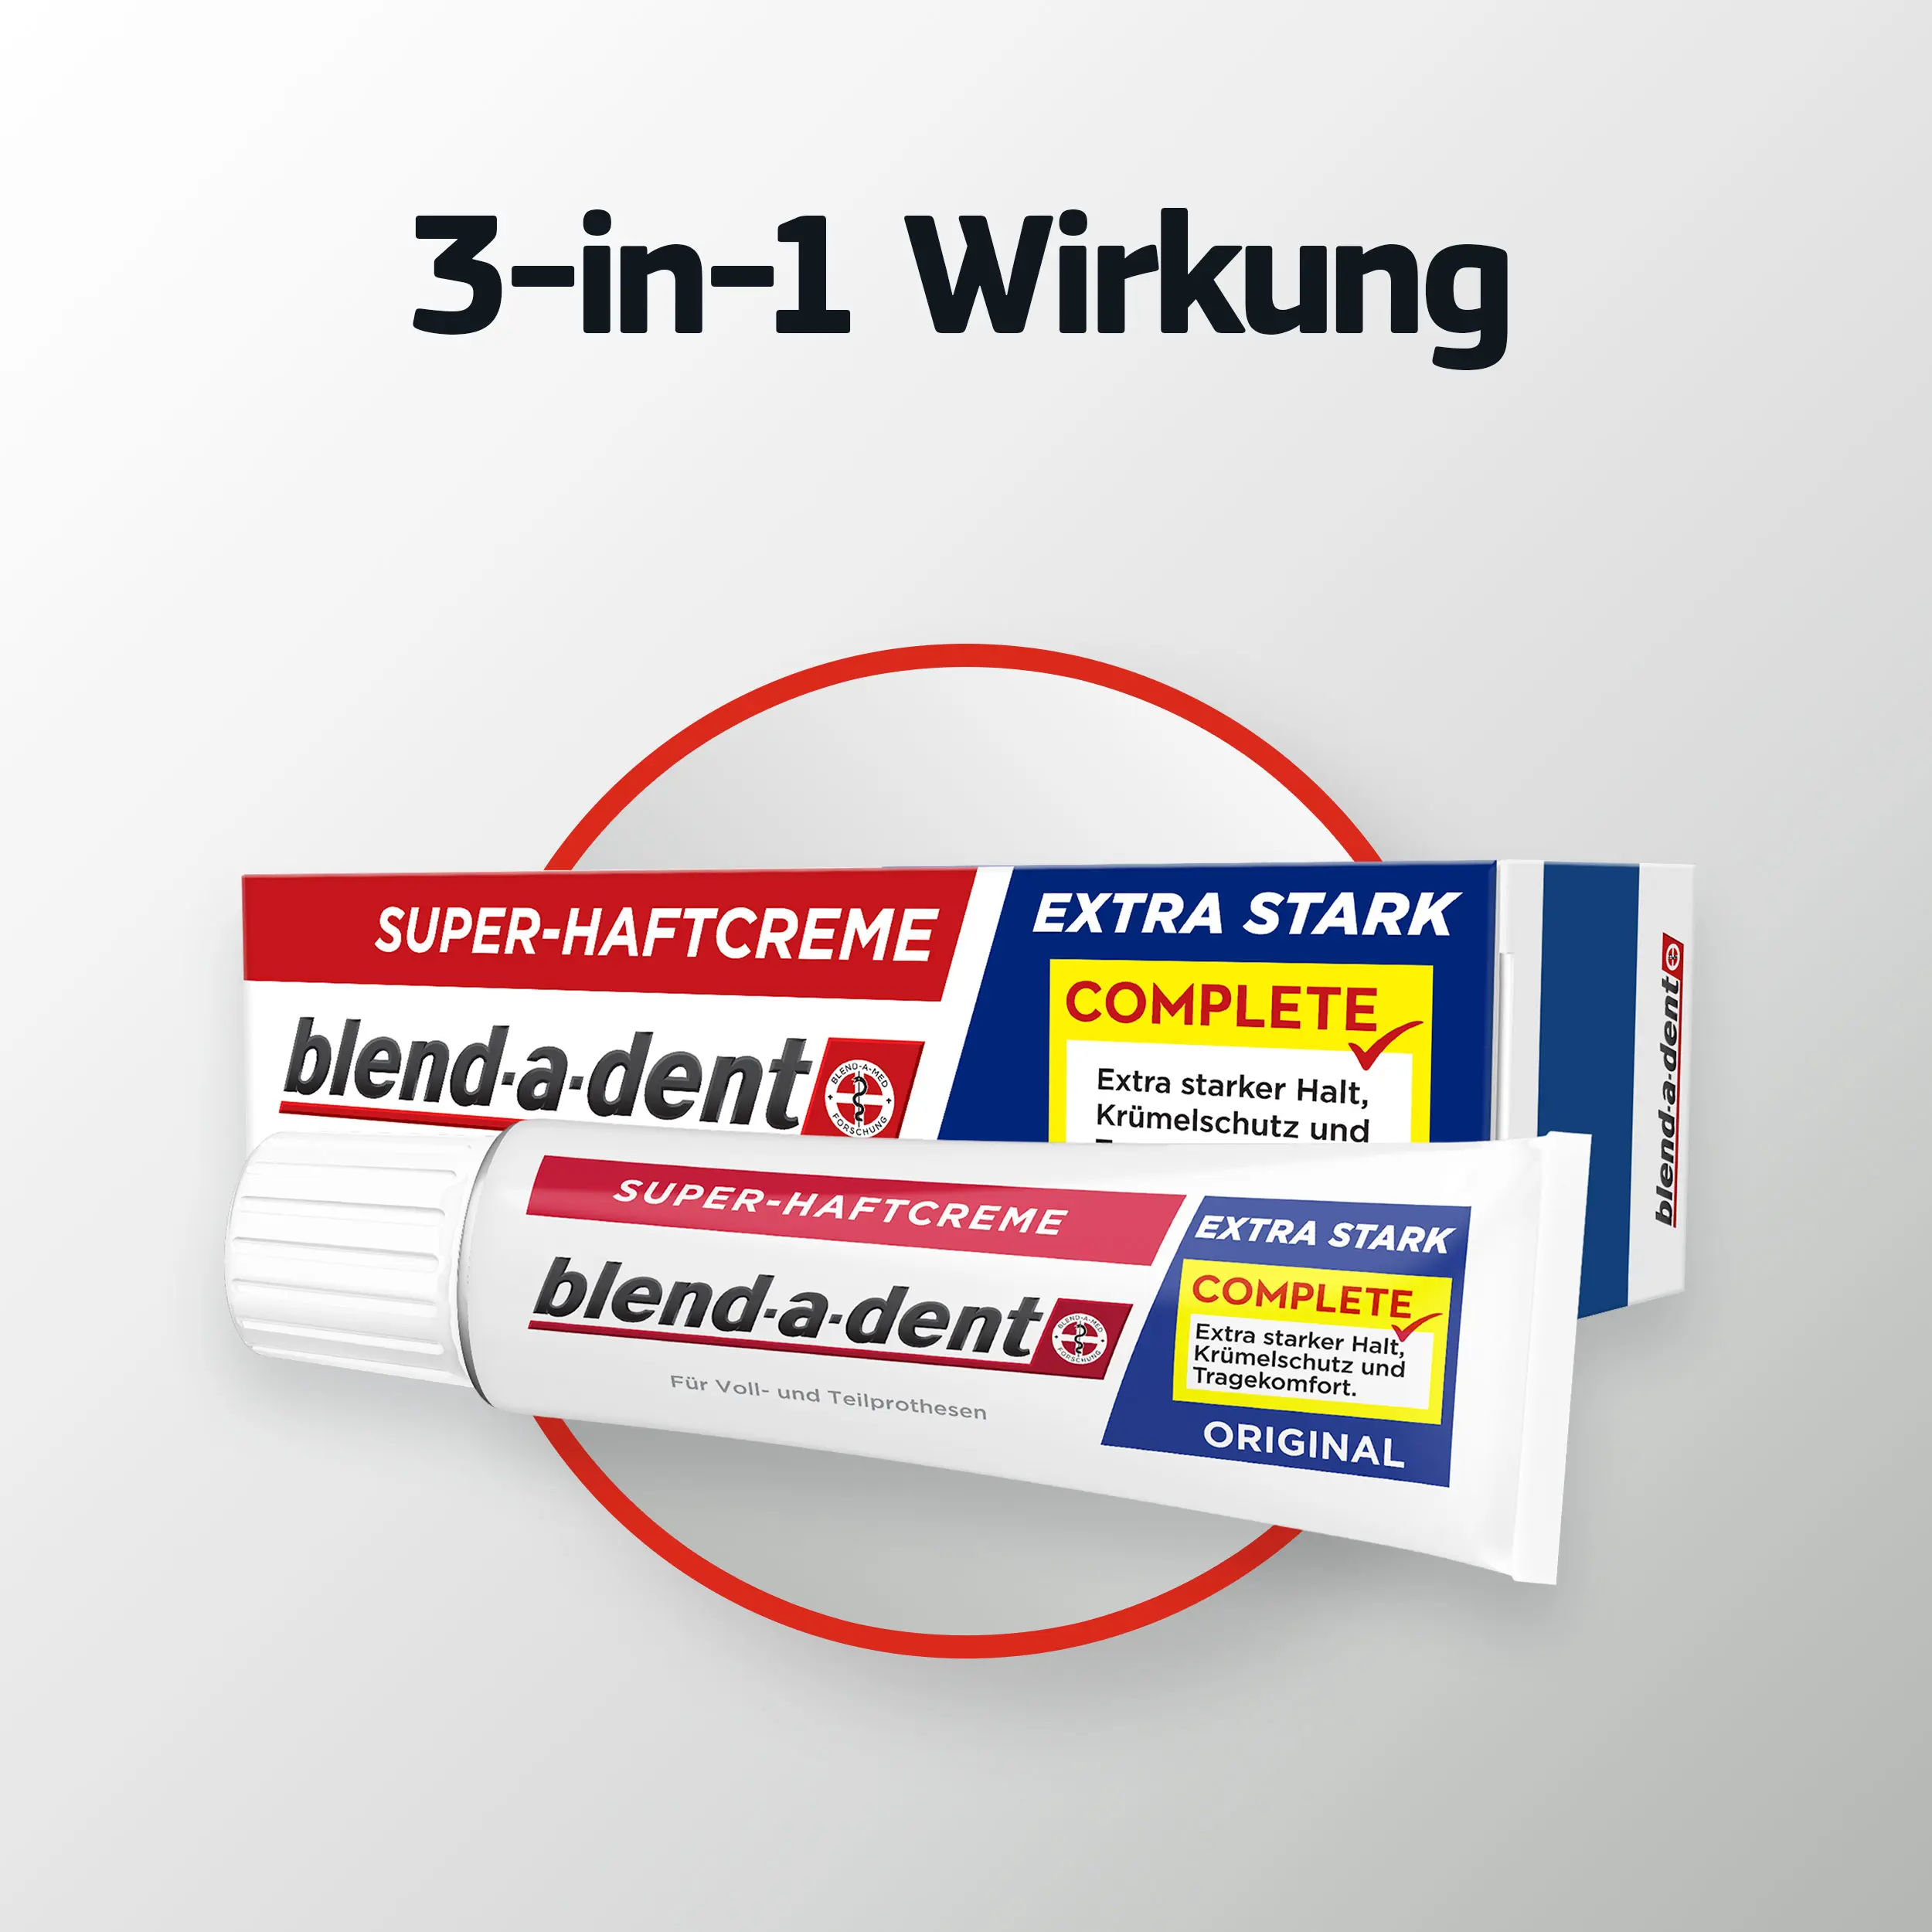 3-in-1 Wirkung